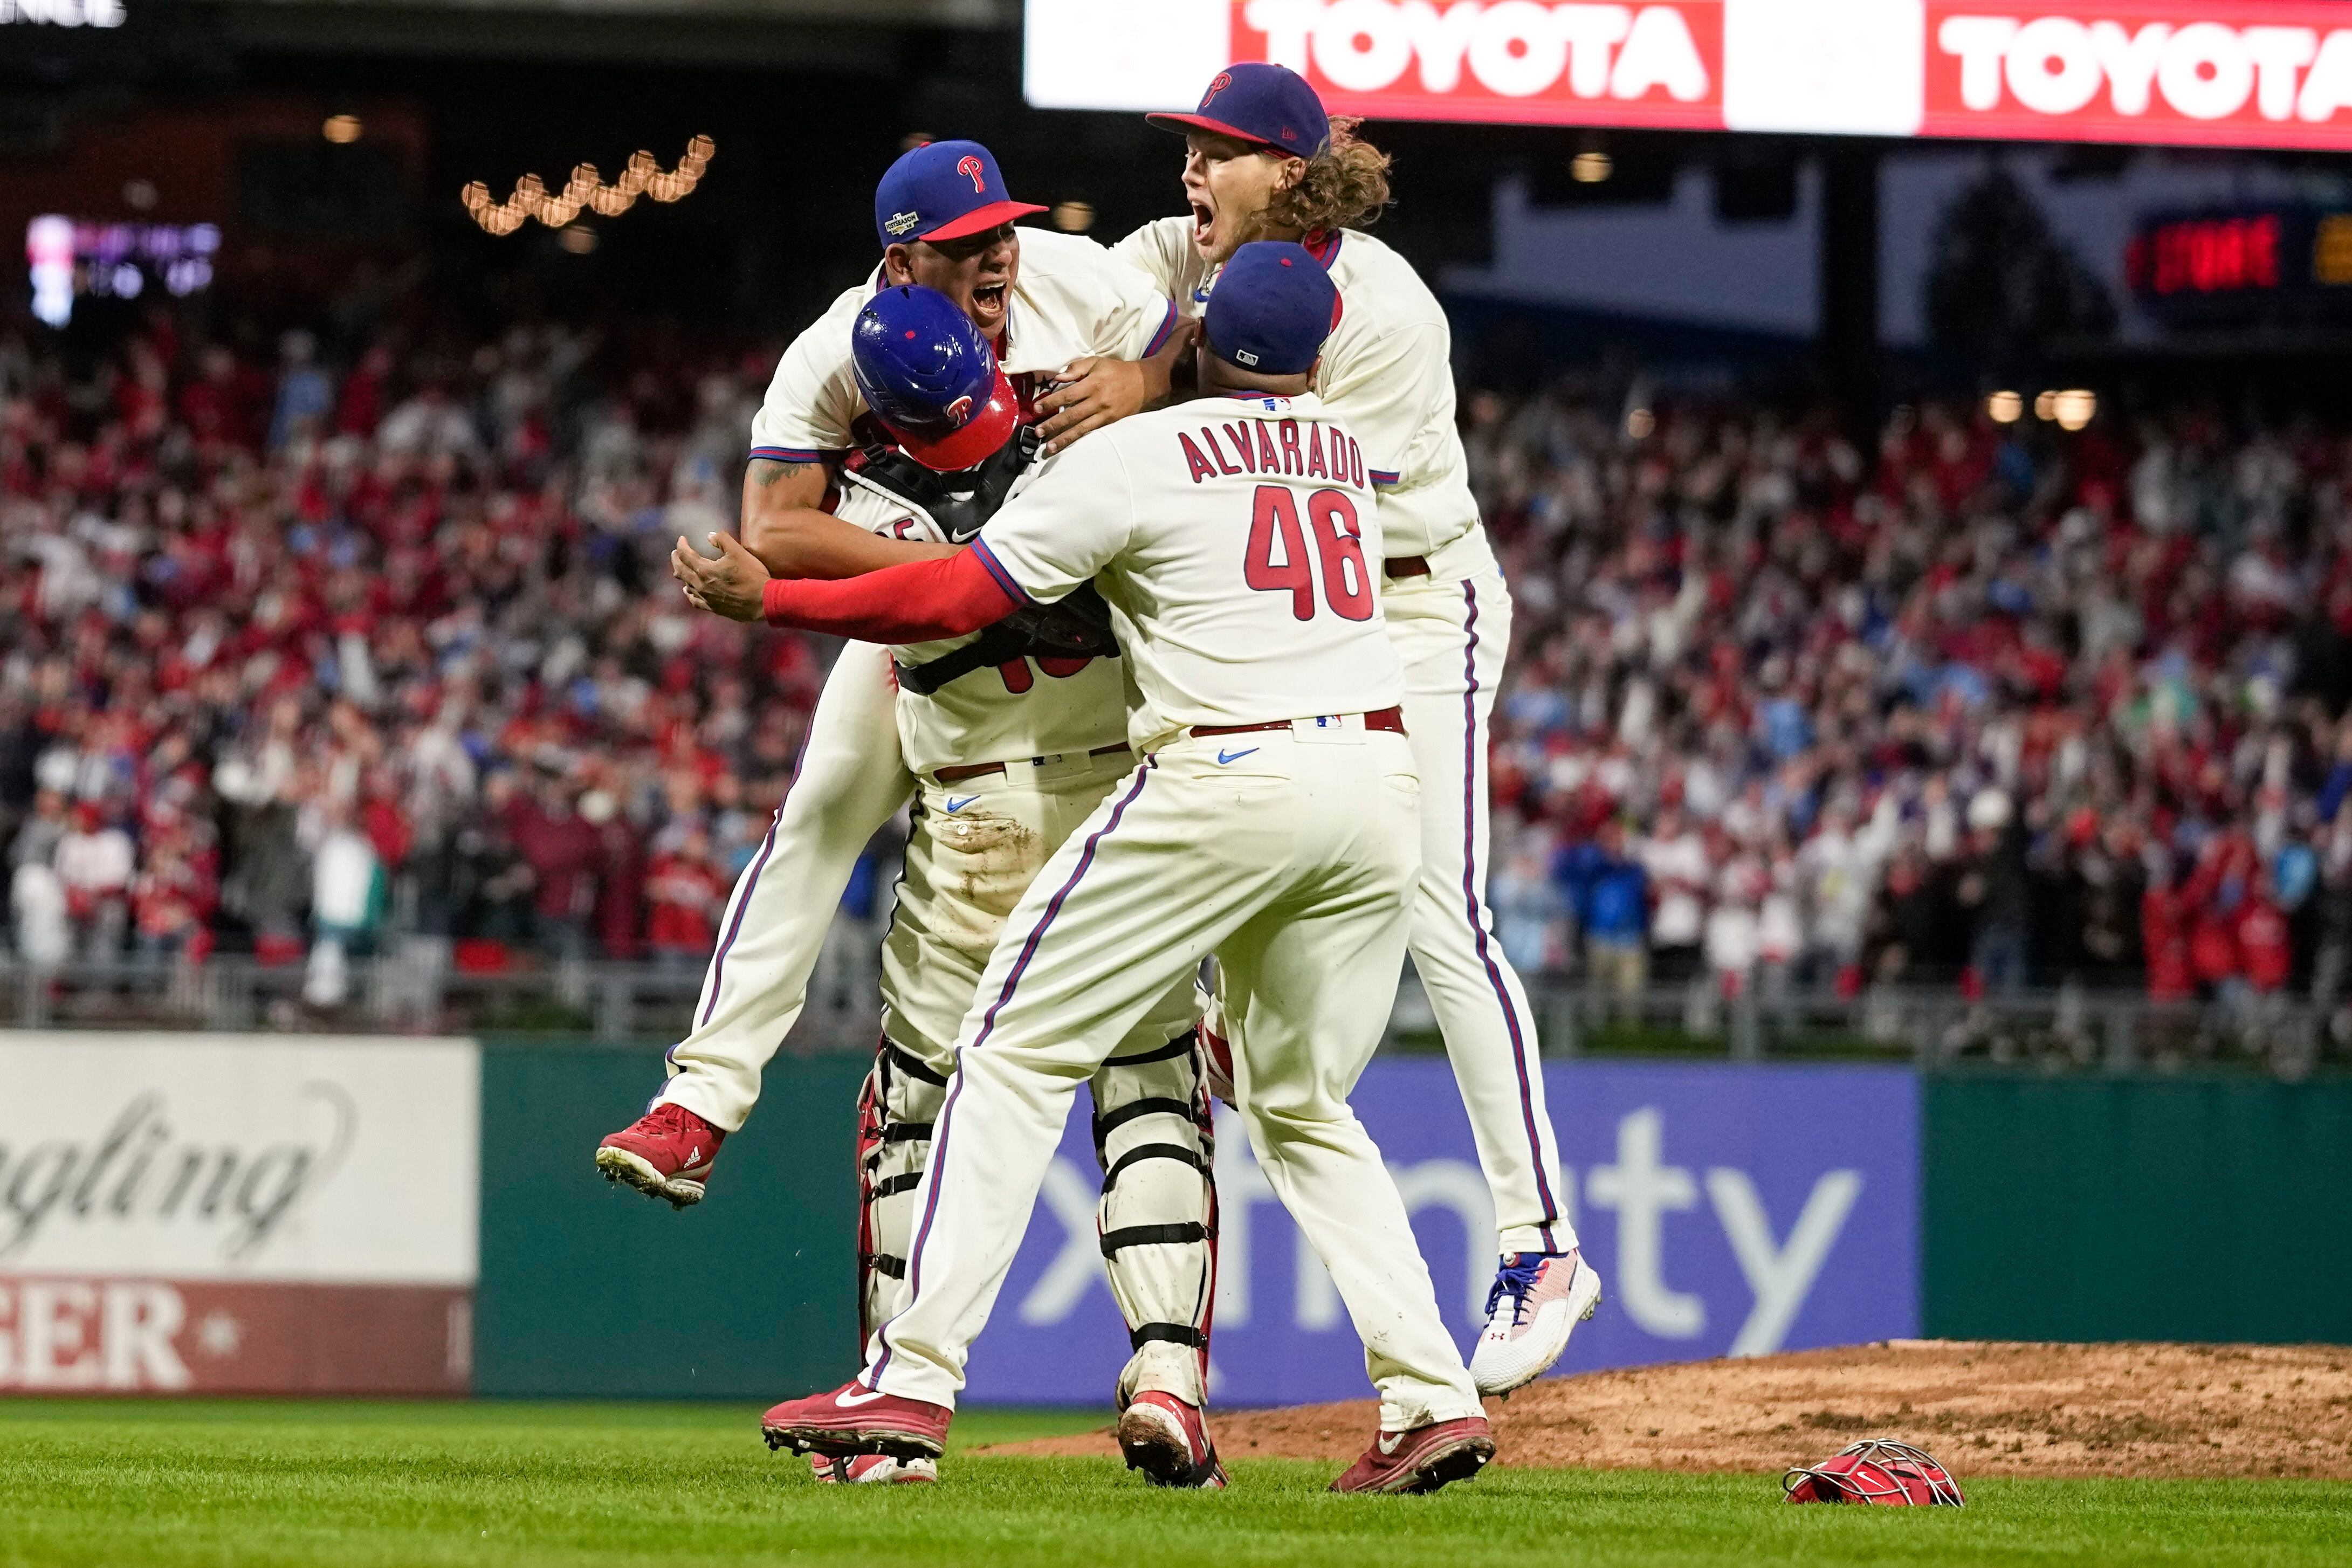 Harper's HR powers Phillies past Padres, into World Series, SiouxlandProud, Sioux City, IA